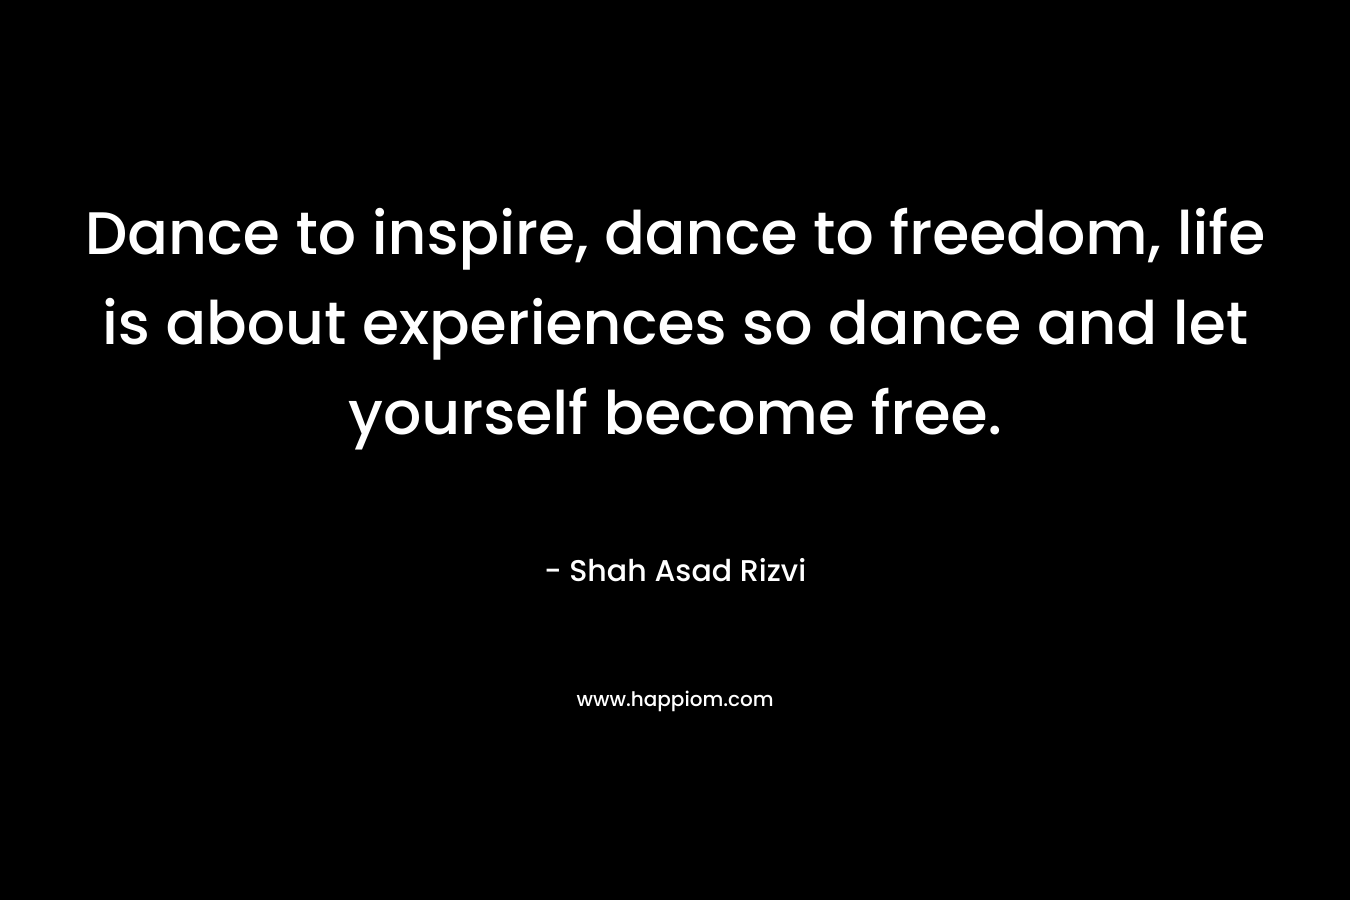 Dance to inspire, dance to freedom, life is about experiences so dance and let yourself become free.